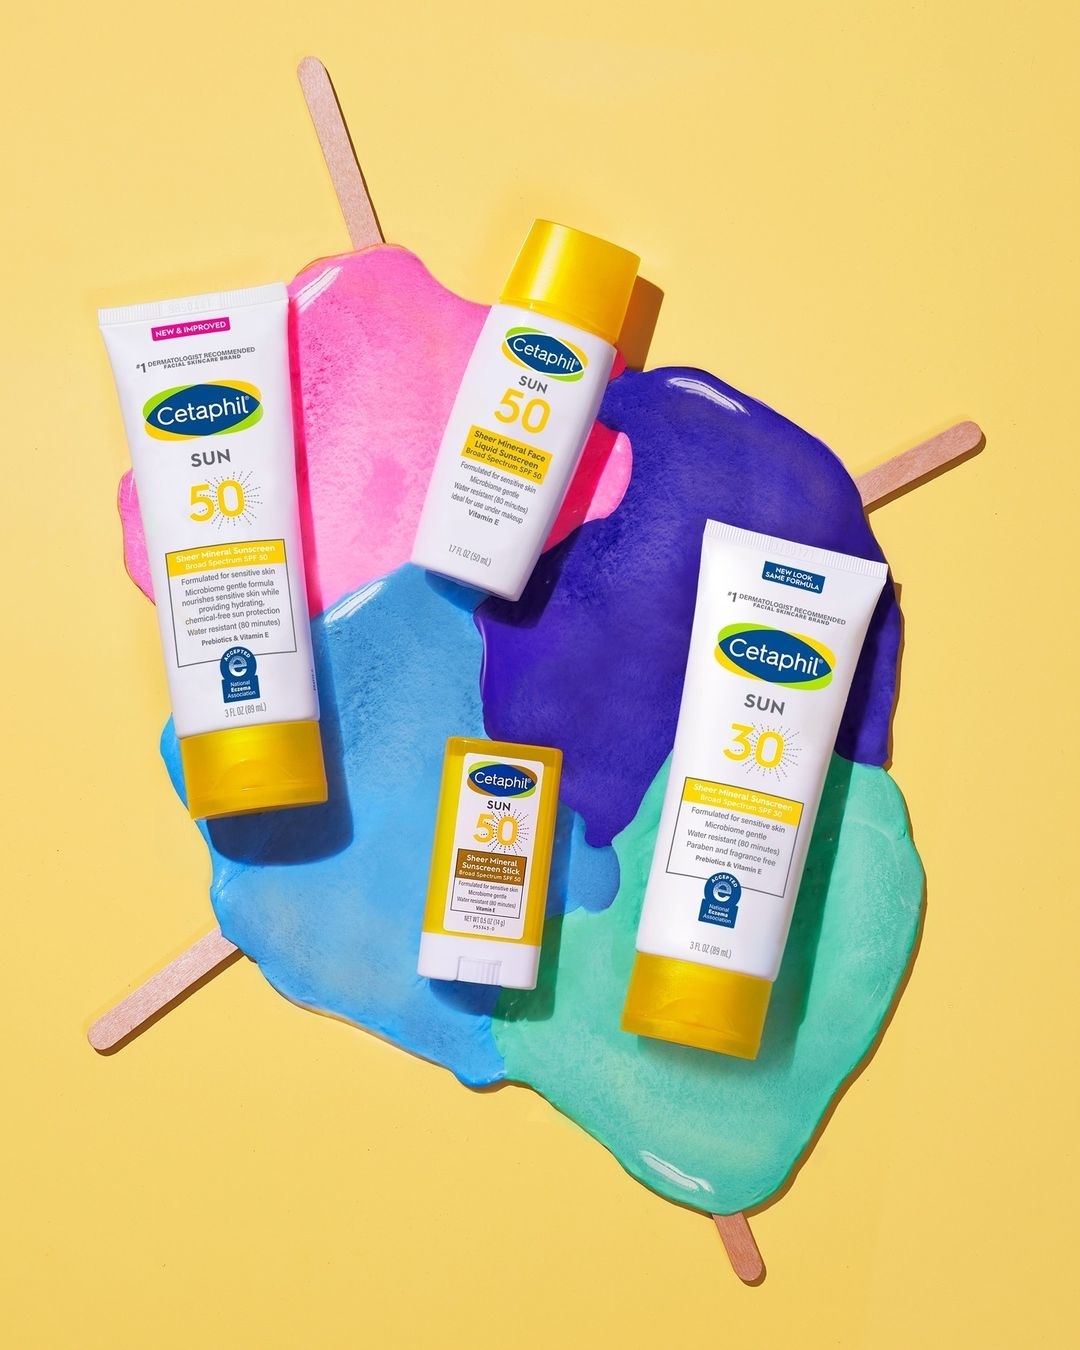 Assorted Cetaphil sunscreen products arranged on a colorful splash backdrop